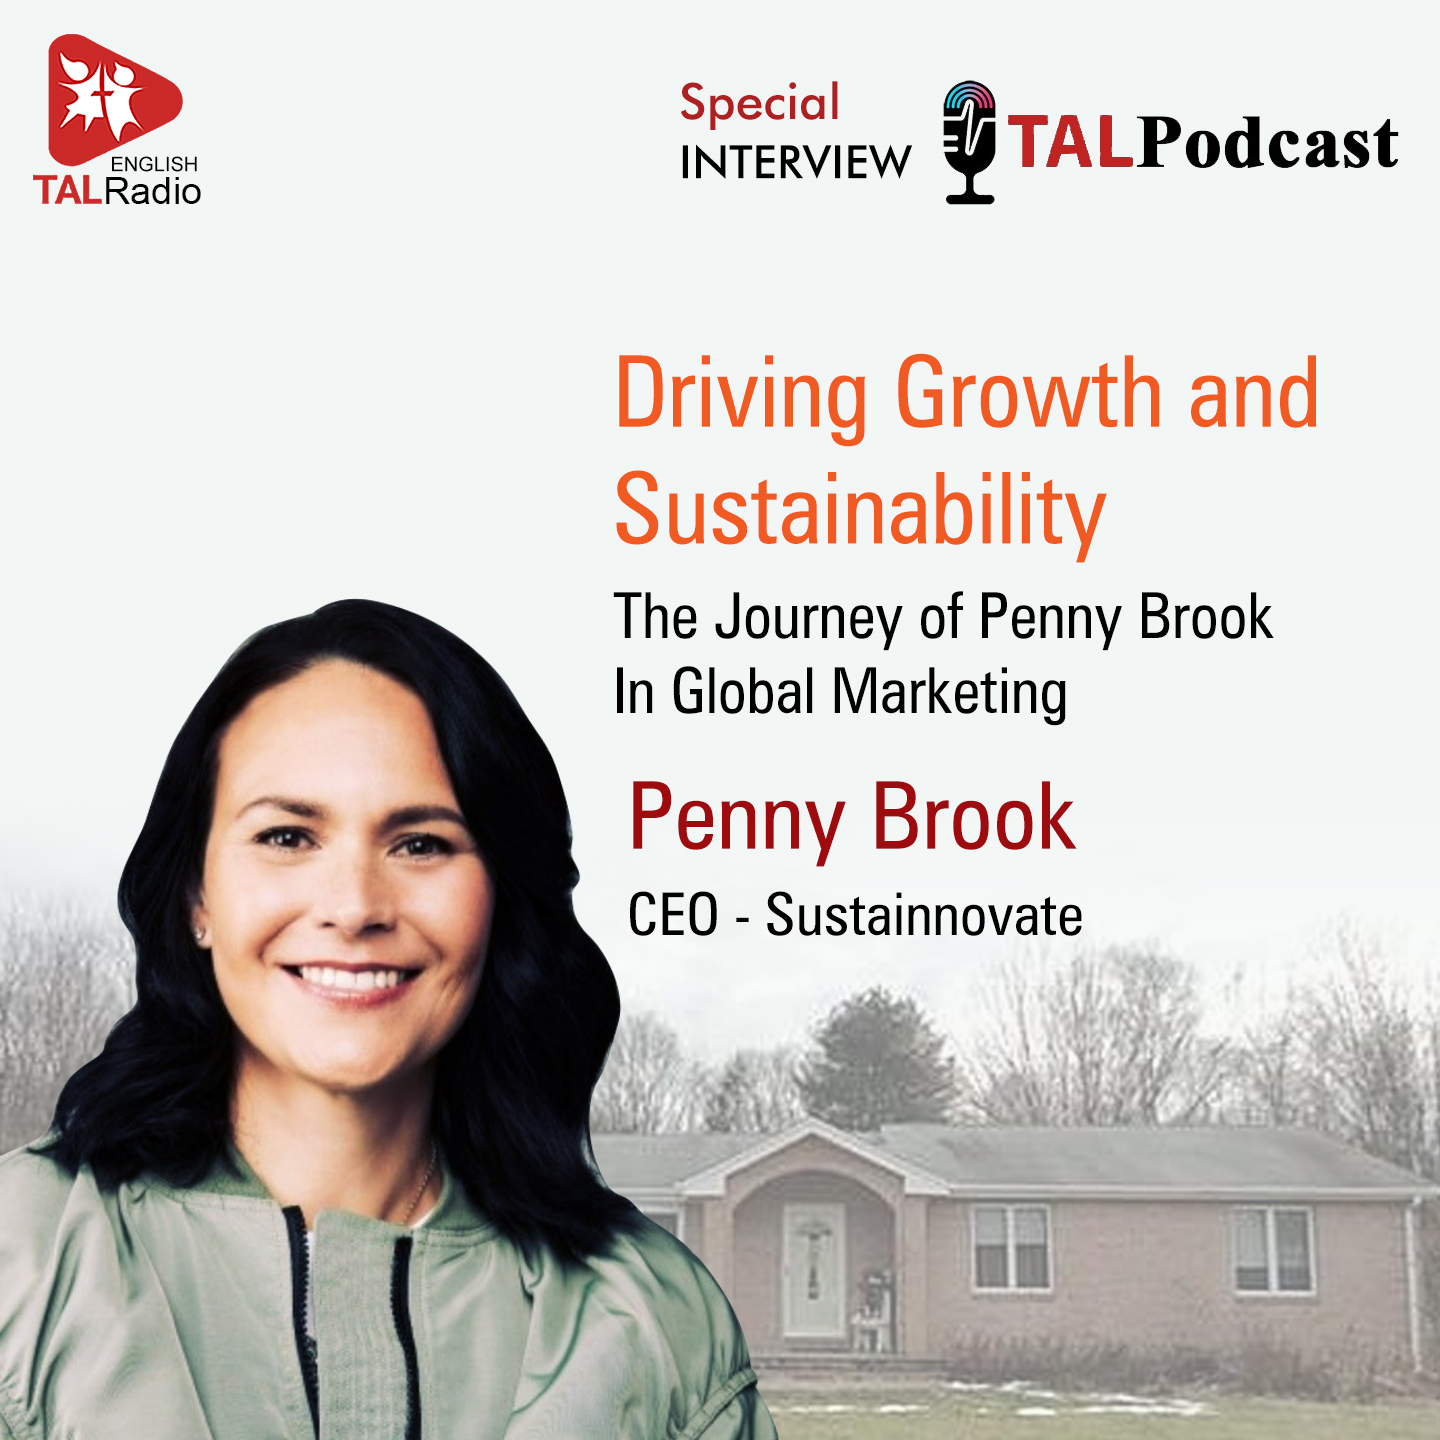 Driving Growth and Sustainability: The Journey of Penny Brook in Global Marketing